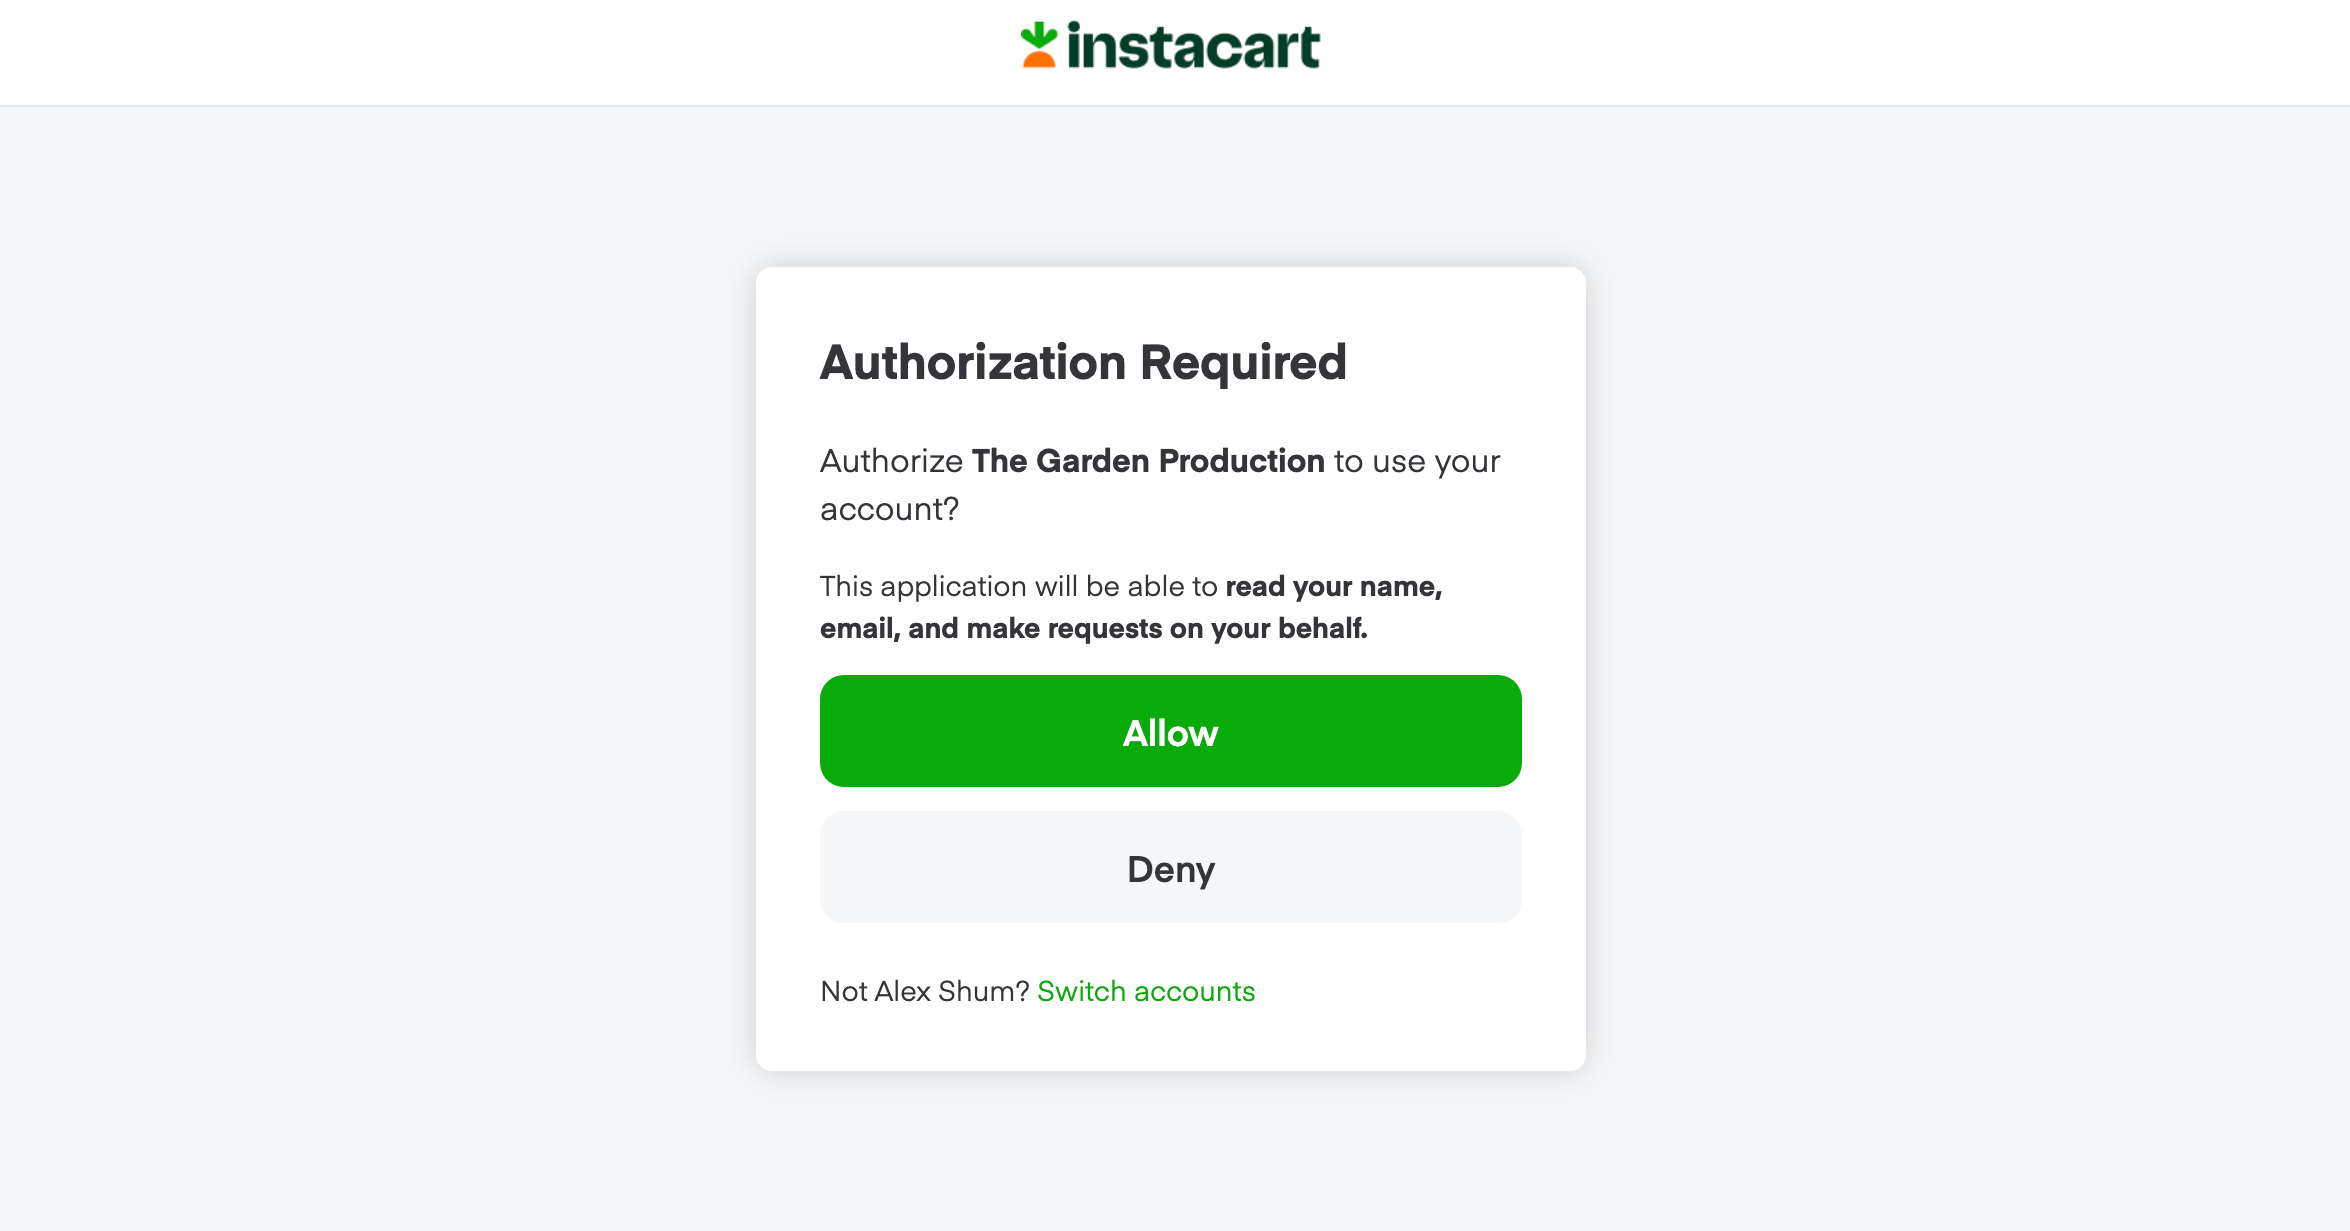 The image shows the Authorization Required page with the following text: Authorize the retailer to use your account? The application can read your name, email, and make requests on your behalf. There are two buttons: Allow and Deny